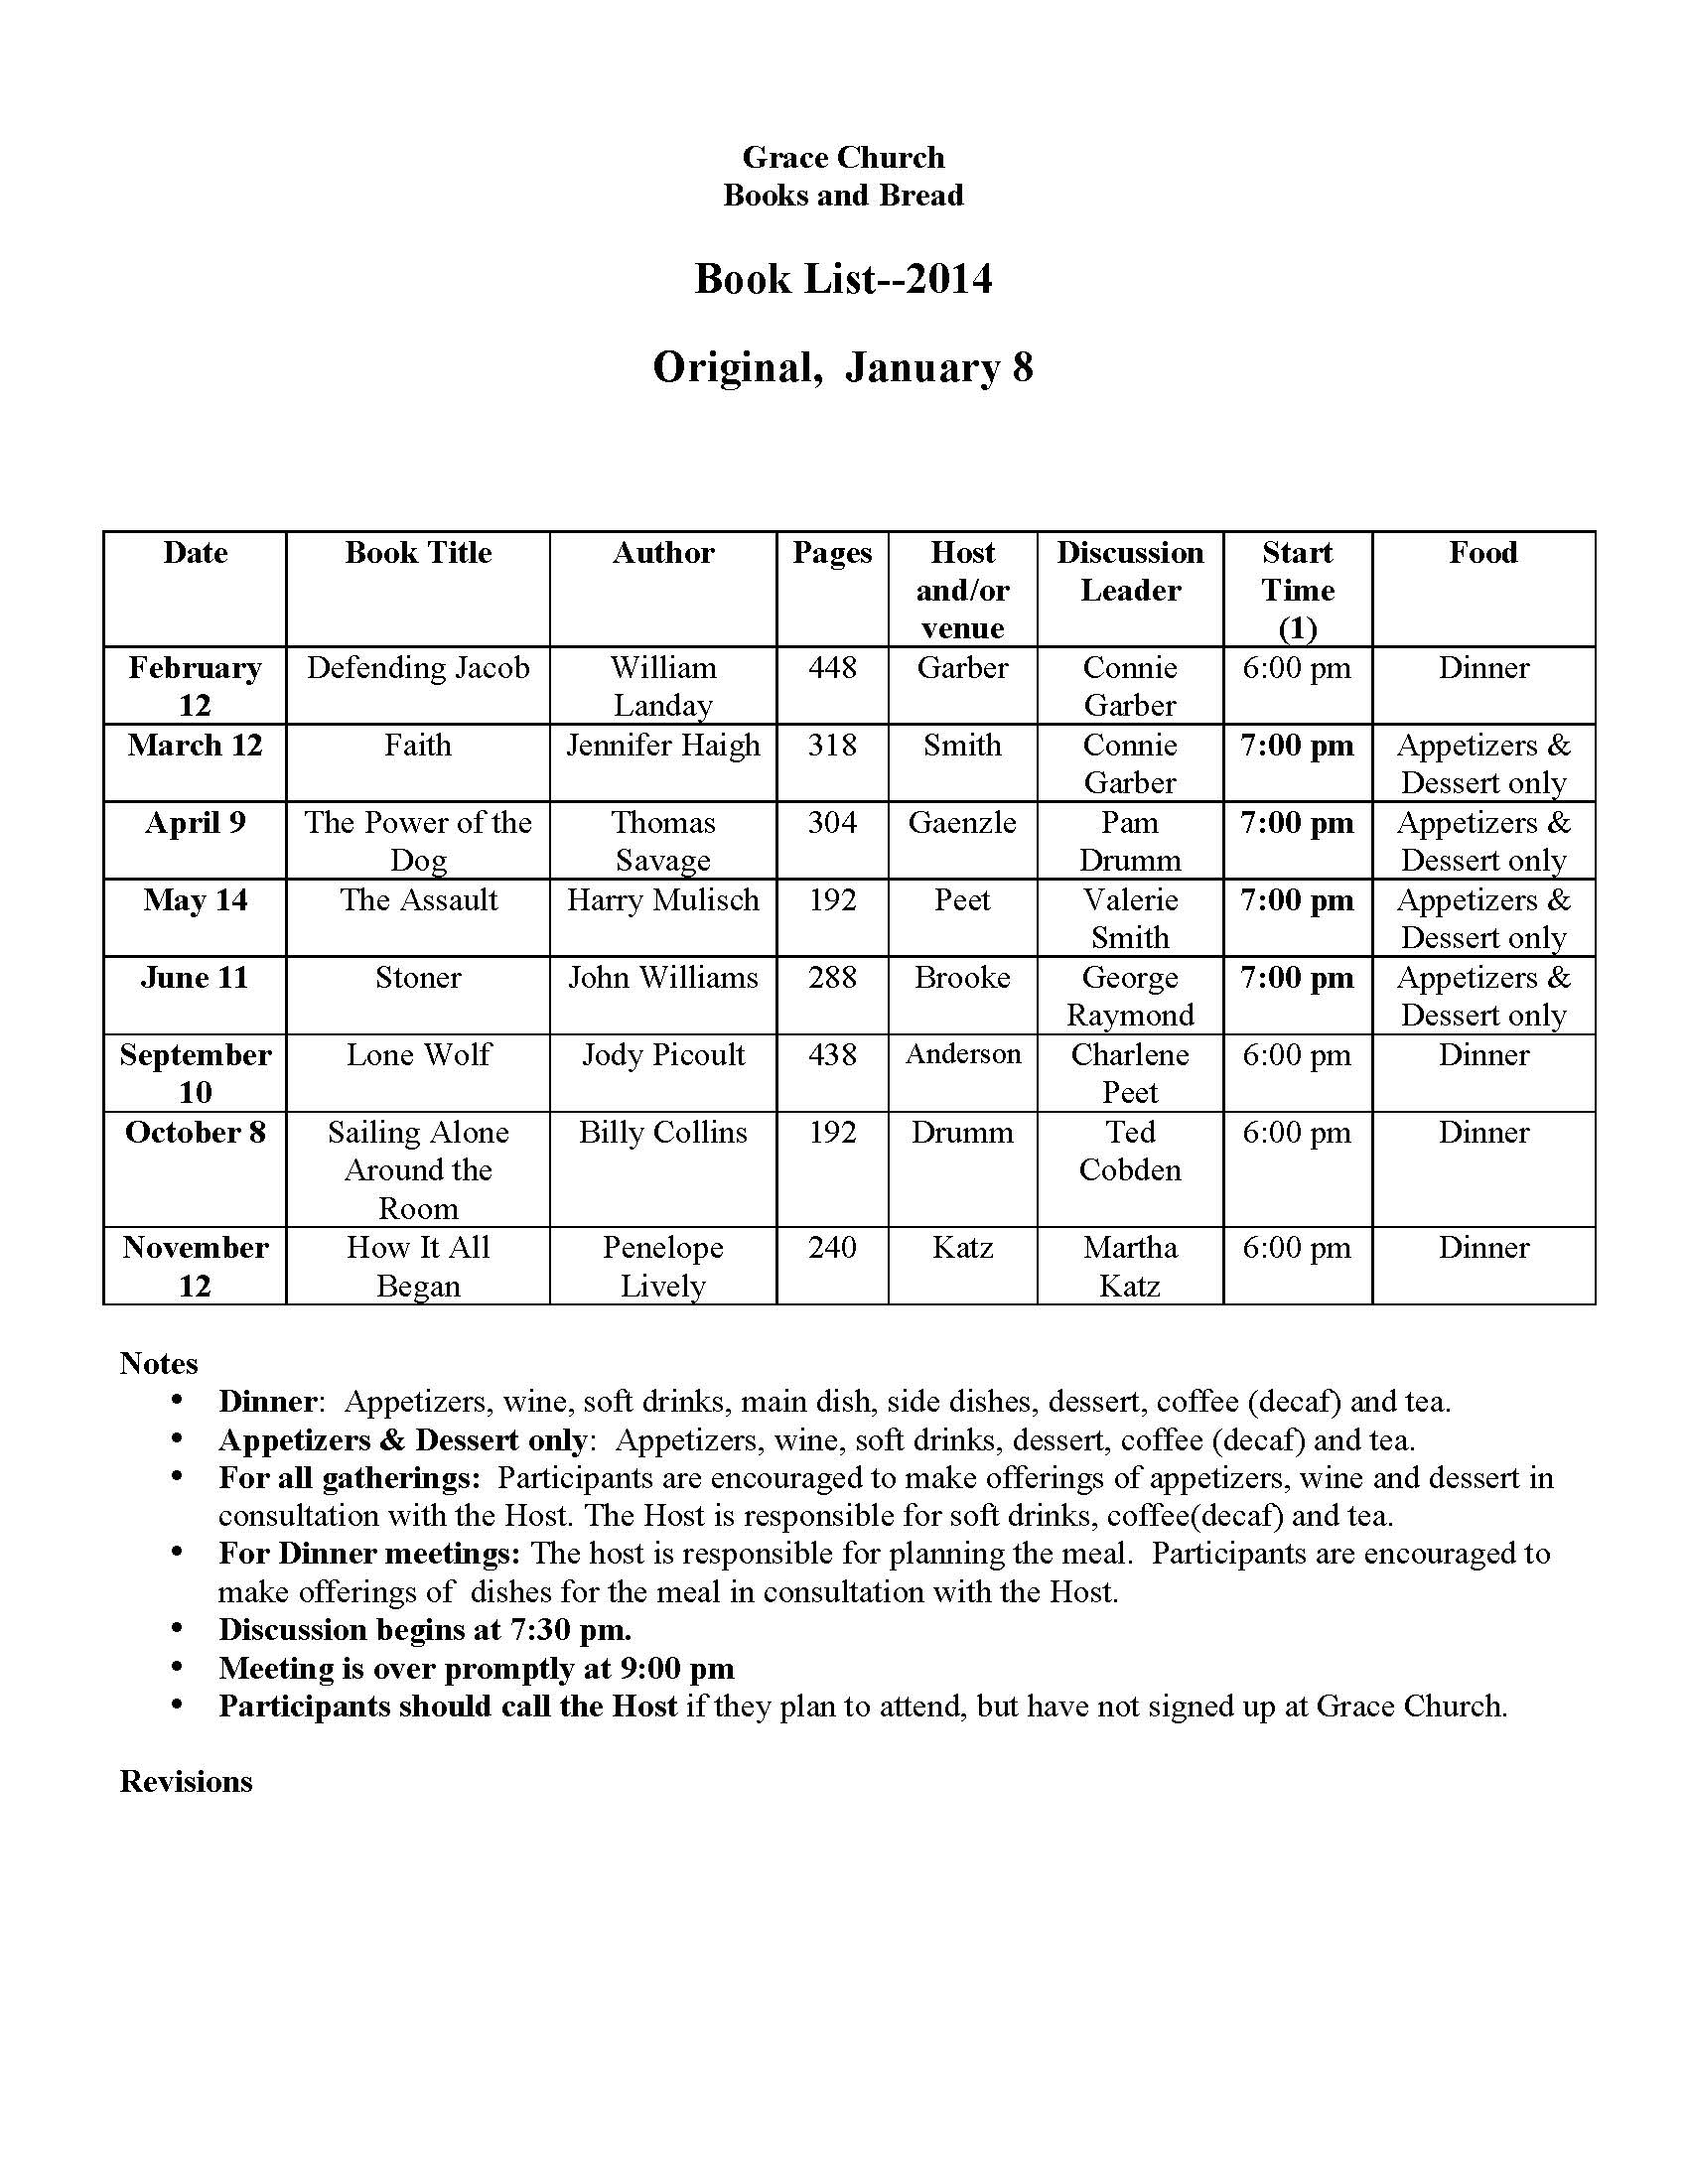 Books and Bread 2014 Schedule